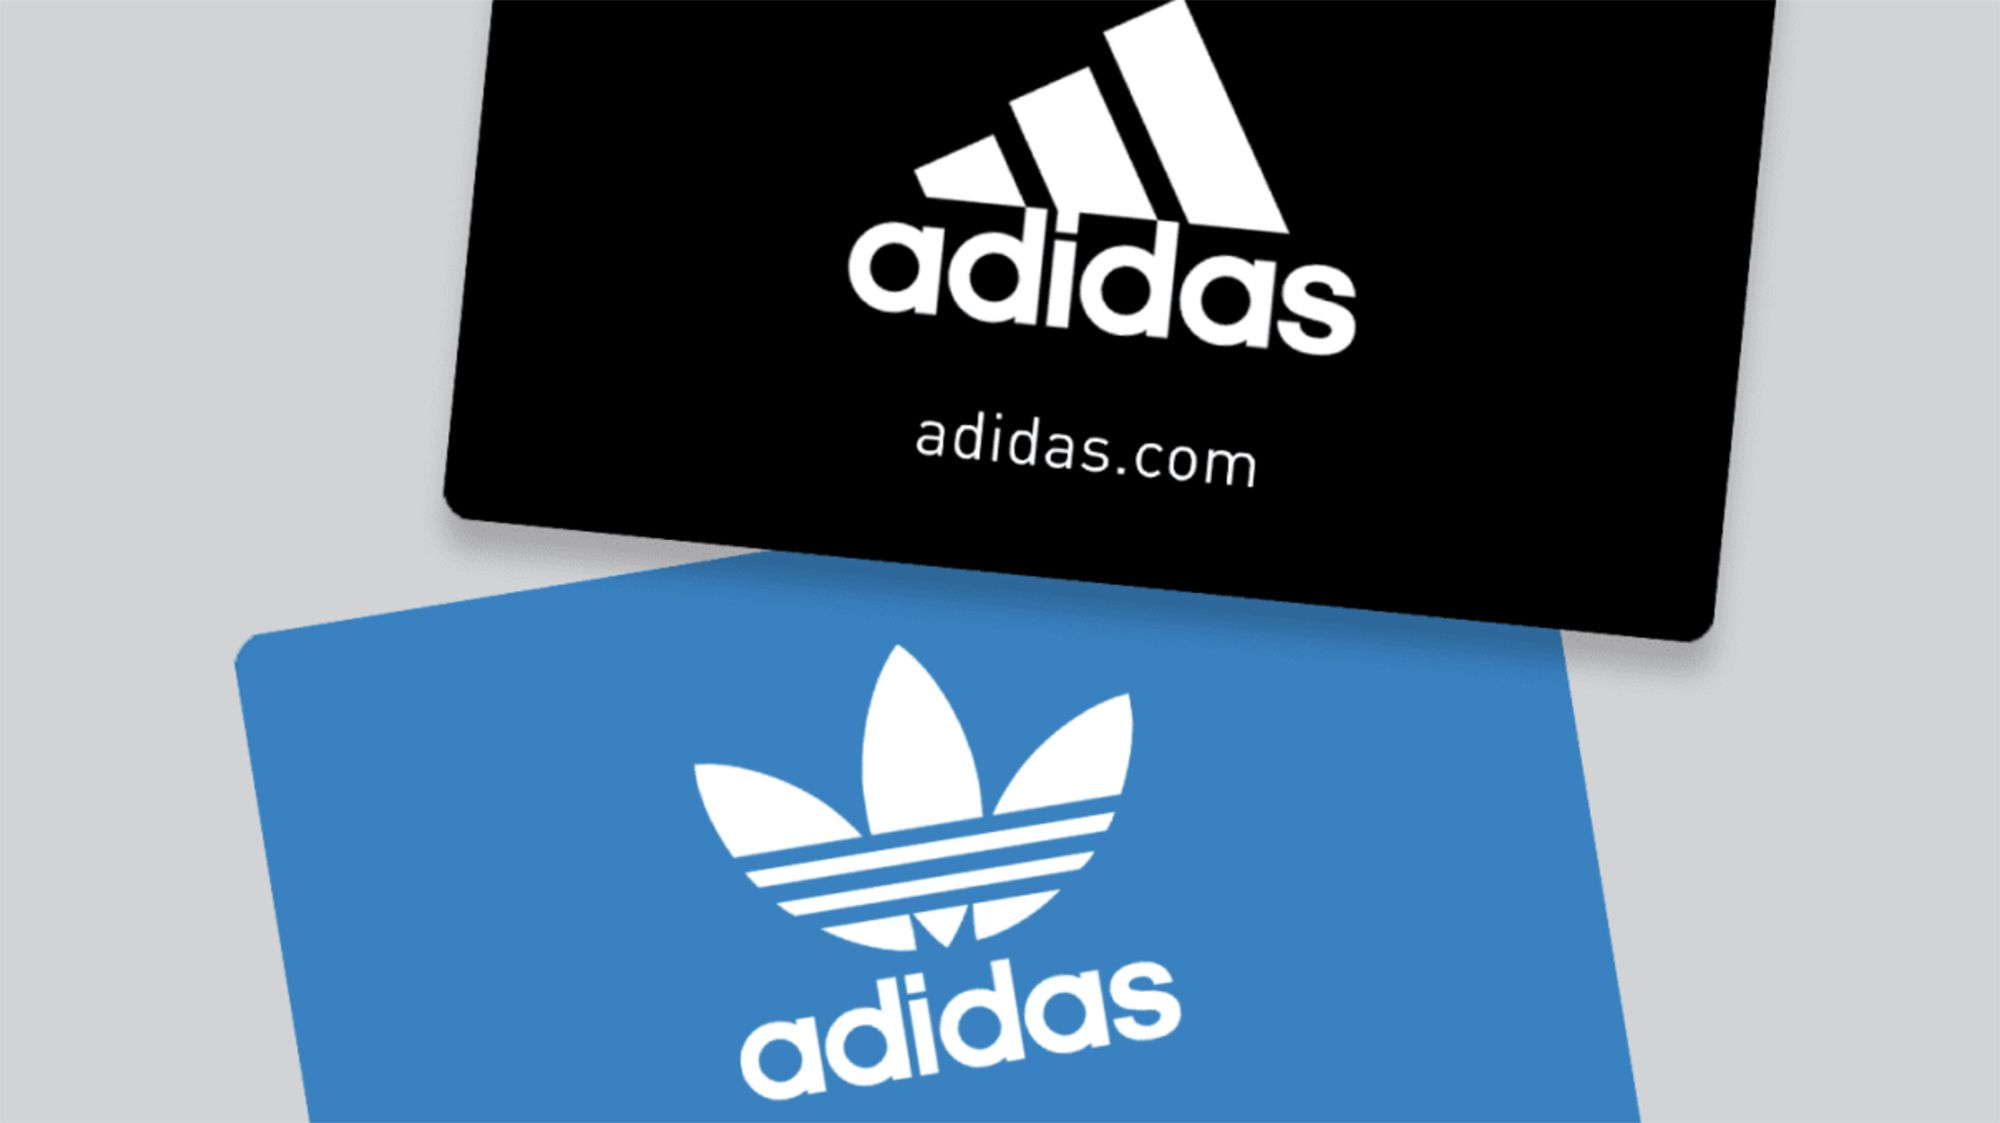 Adidas sale: Buy a $50 gift card for $40 | CNN Underscored